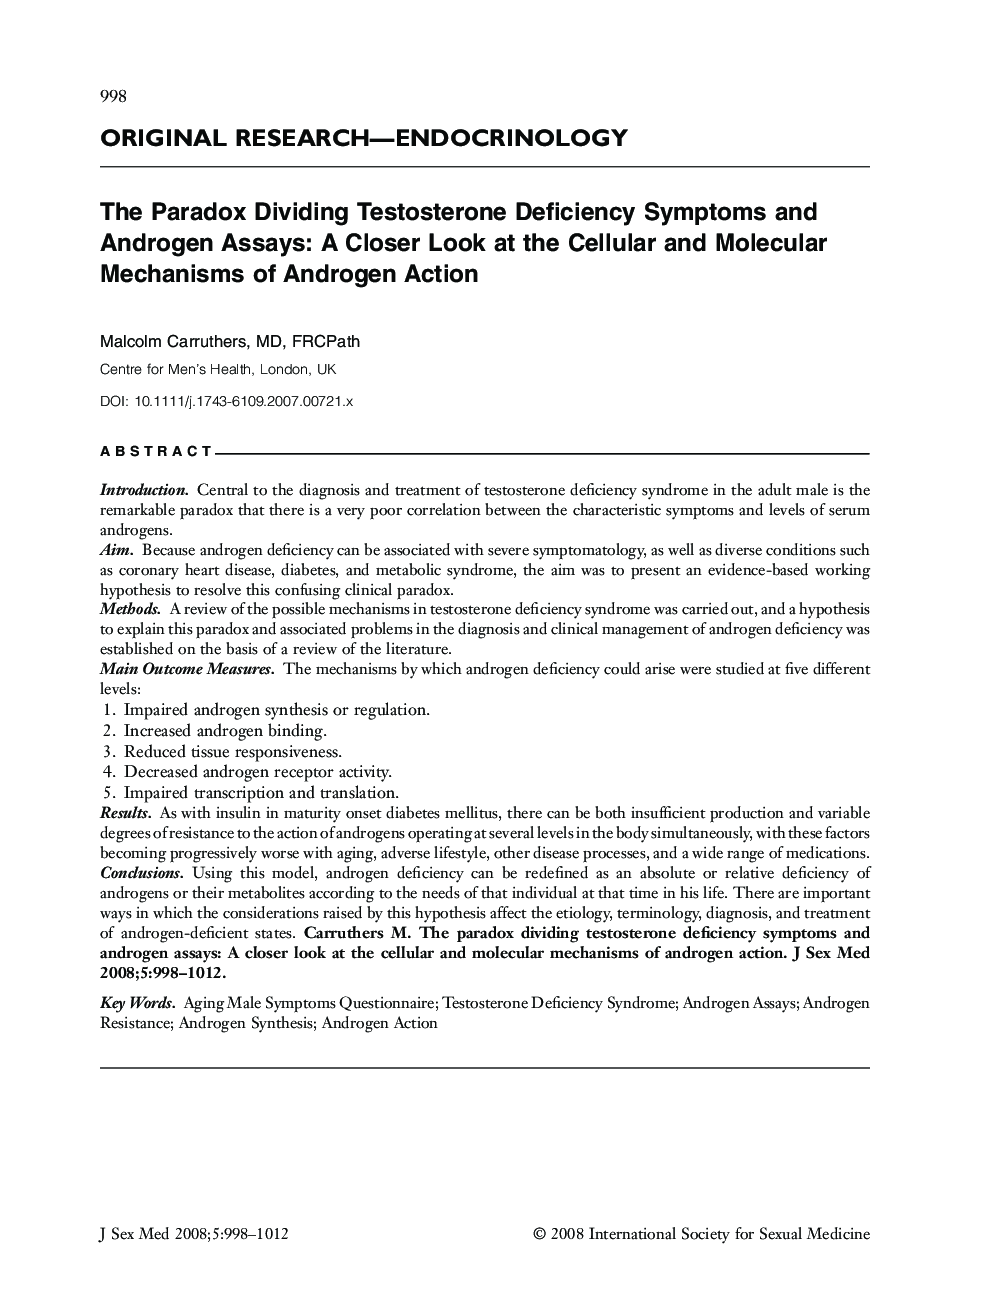 The Paradox Dividing Testosterone Deficiency Symptoms and Androgen Assays: A Closer Look at the Cellular and Molecular Mechanisms of Androgen Action